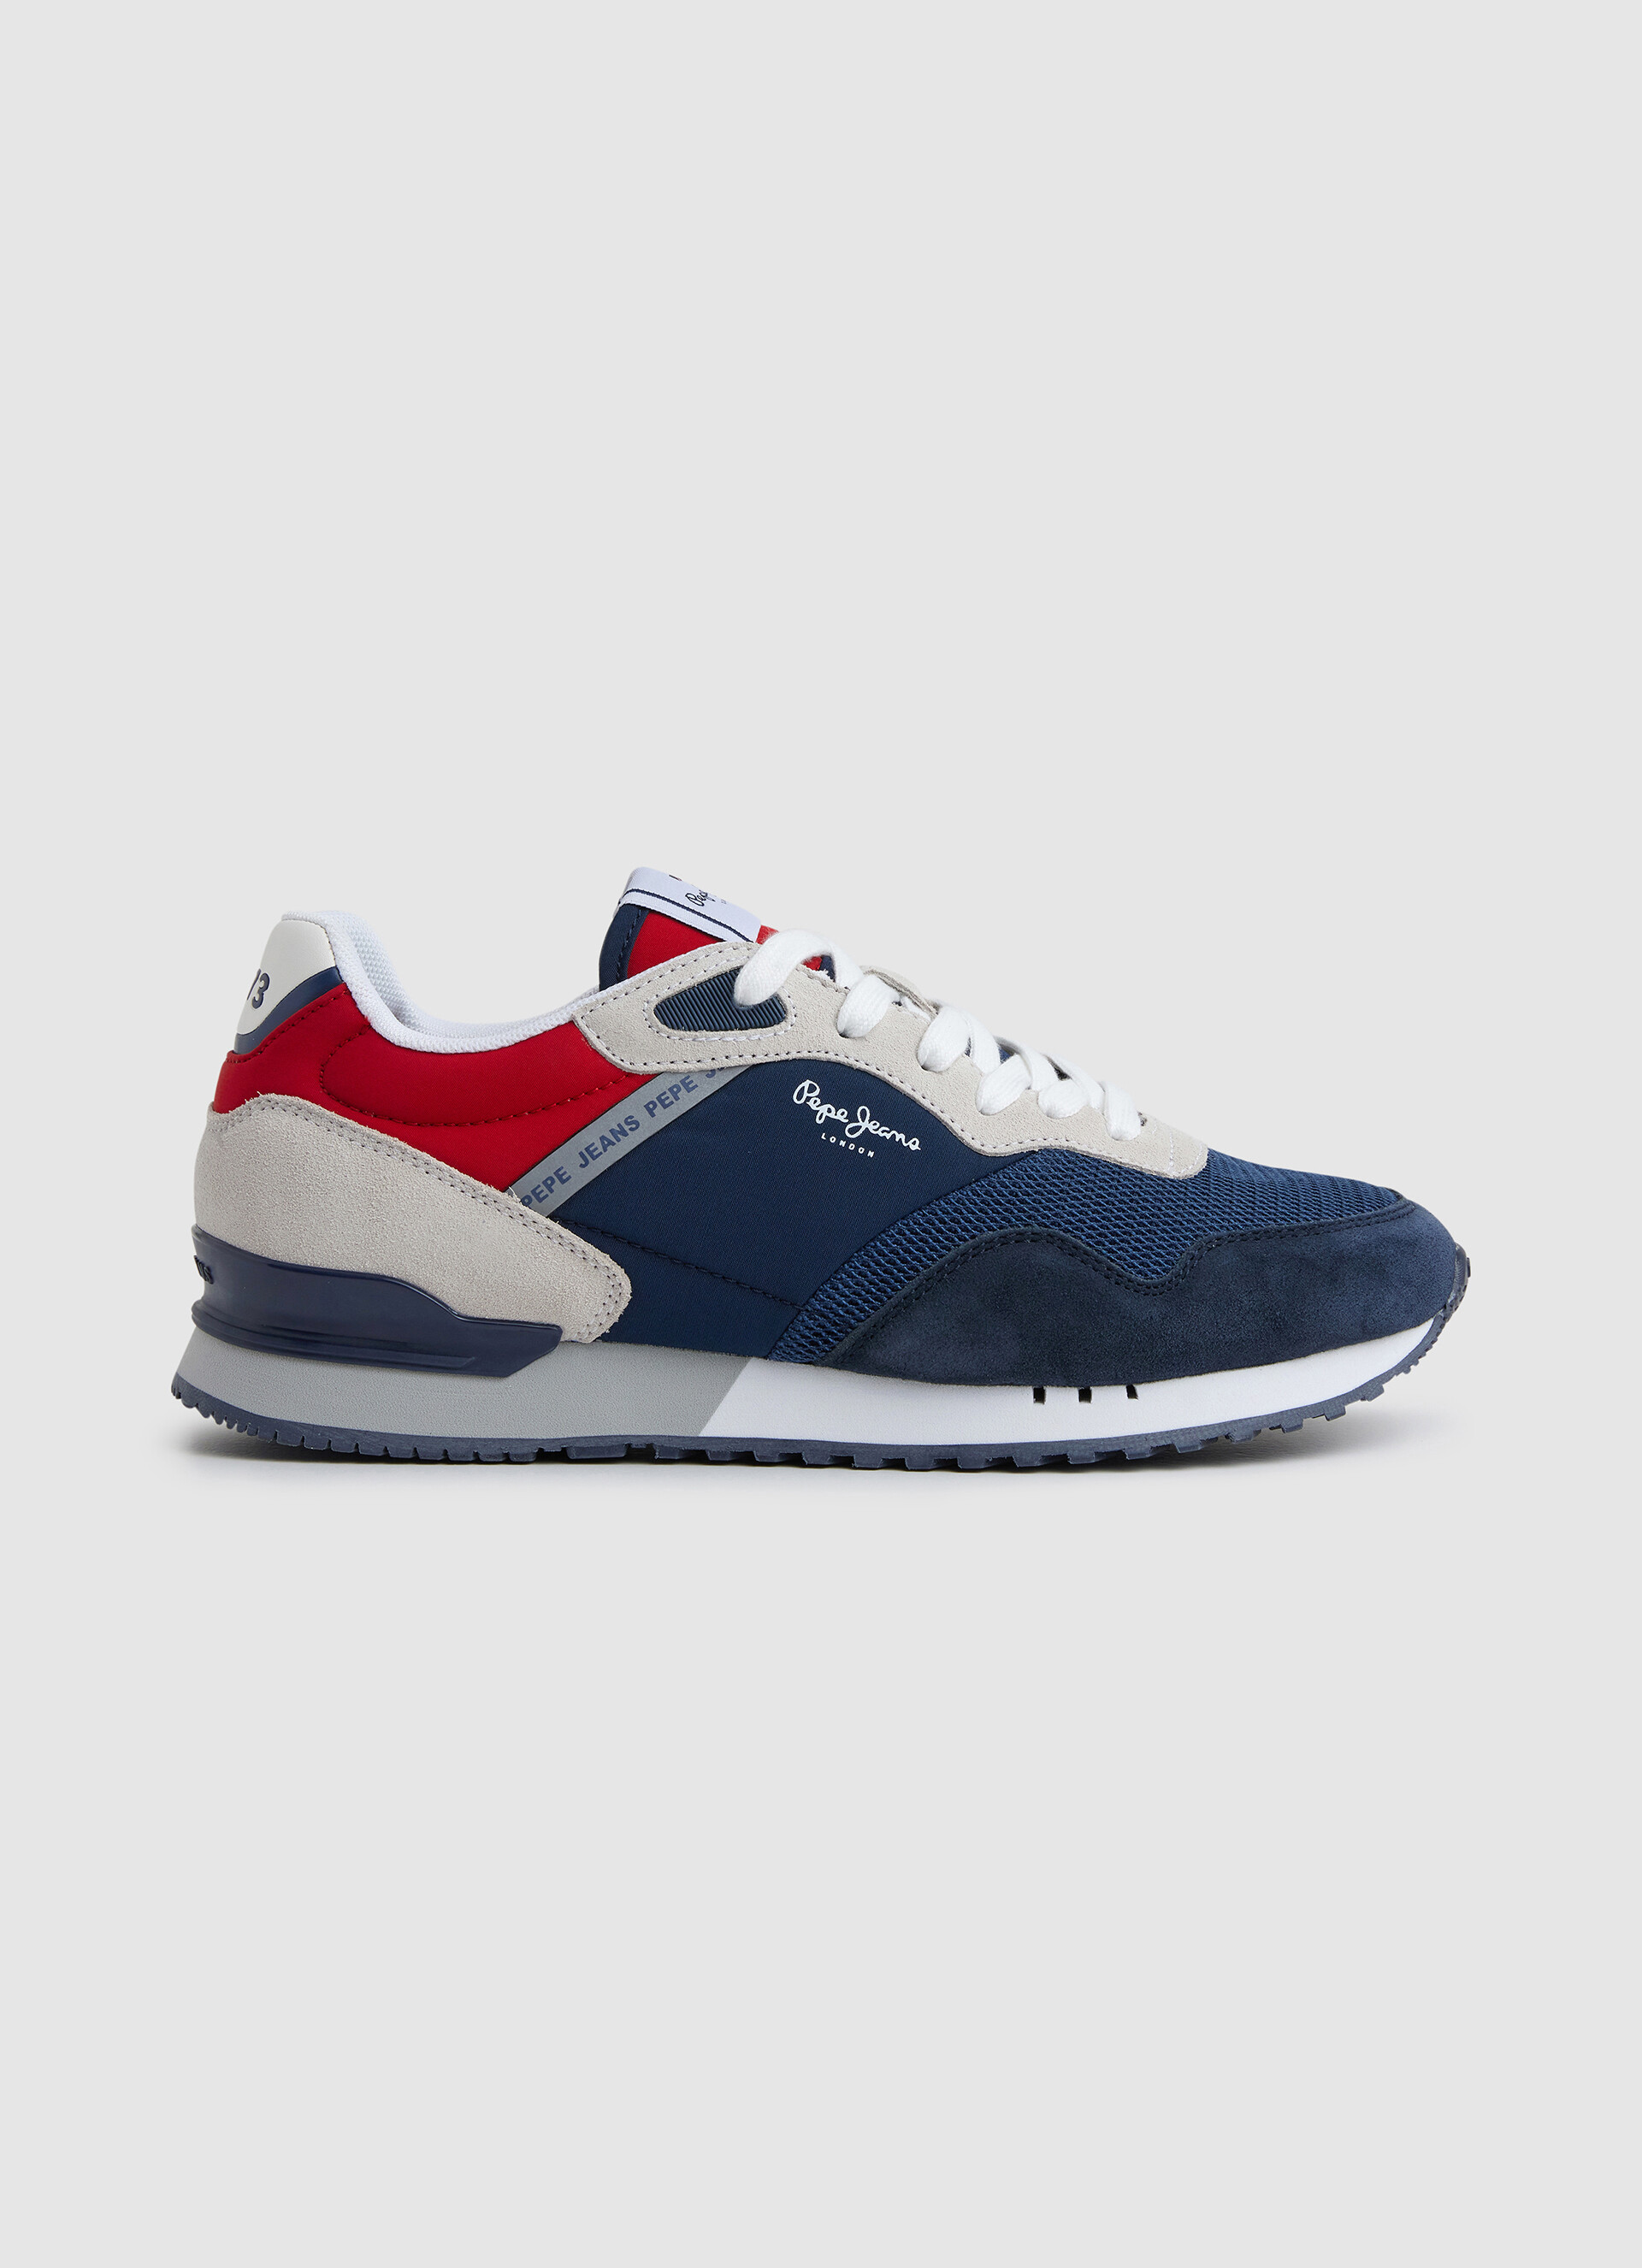 London One Combined Sneakers | Pepe Jeans